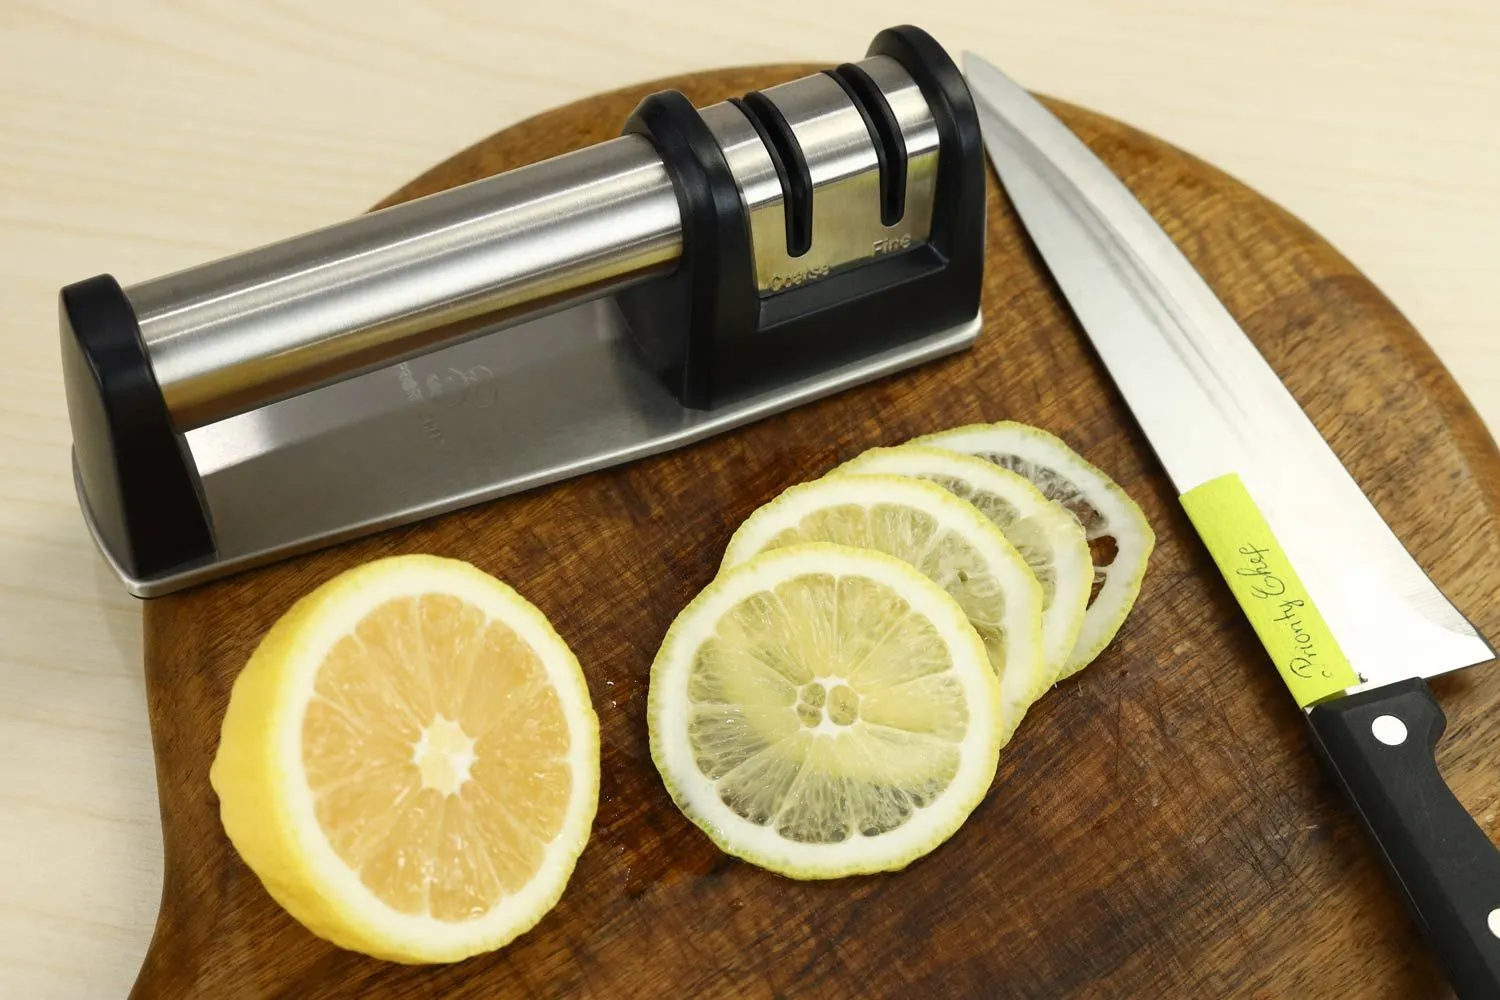 Chef's Choice 4643 Manual Knife Sharpener In-depth Review